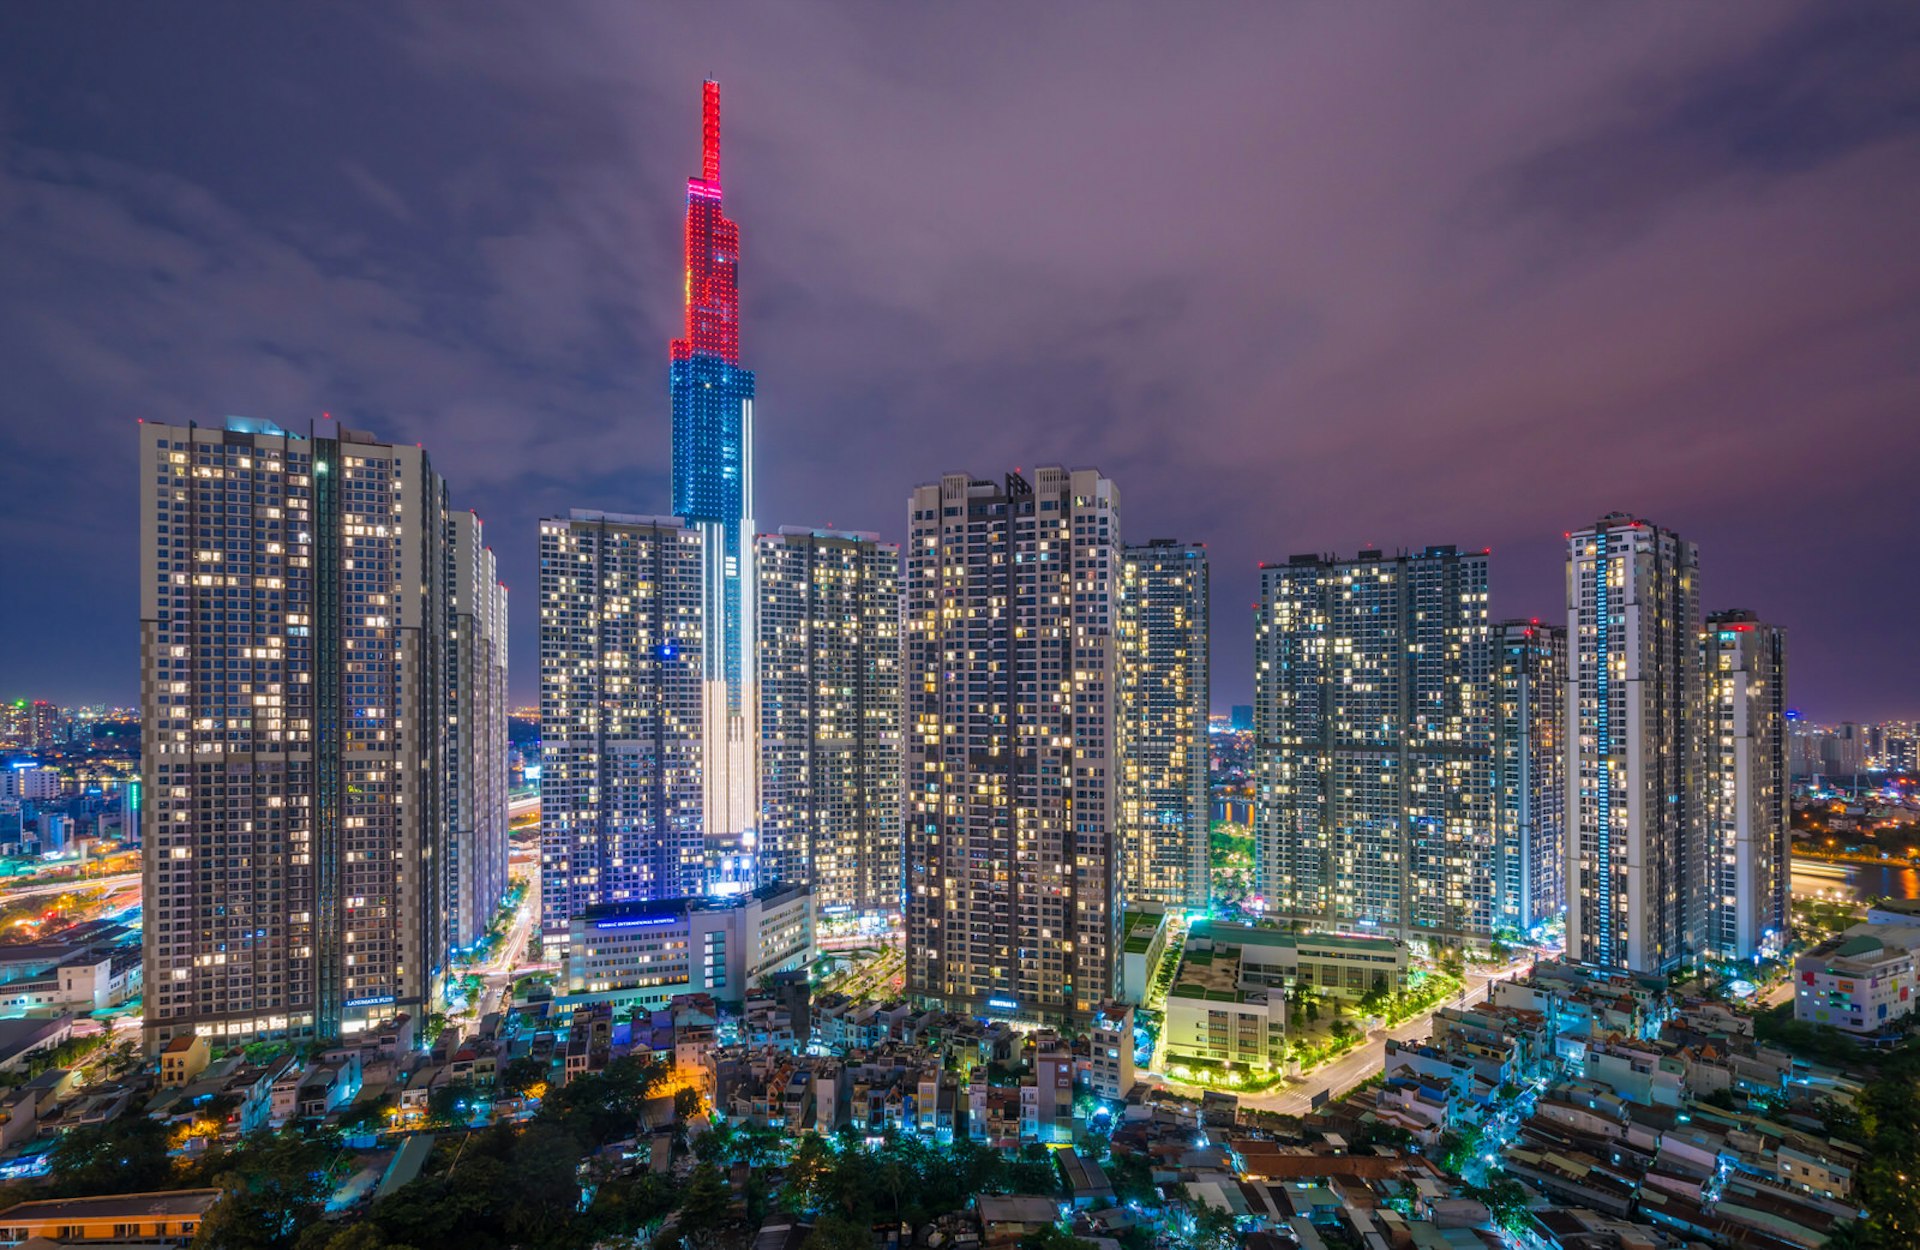 Landmark 81, pictured at night, towers above Ho Chi Minh City. The skyscraper is illuminated by white, blue and red lights in horizontal bands and surrounded by smaller, sparkling buildings. 